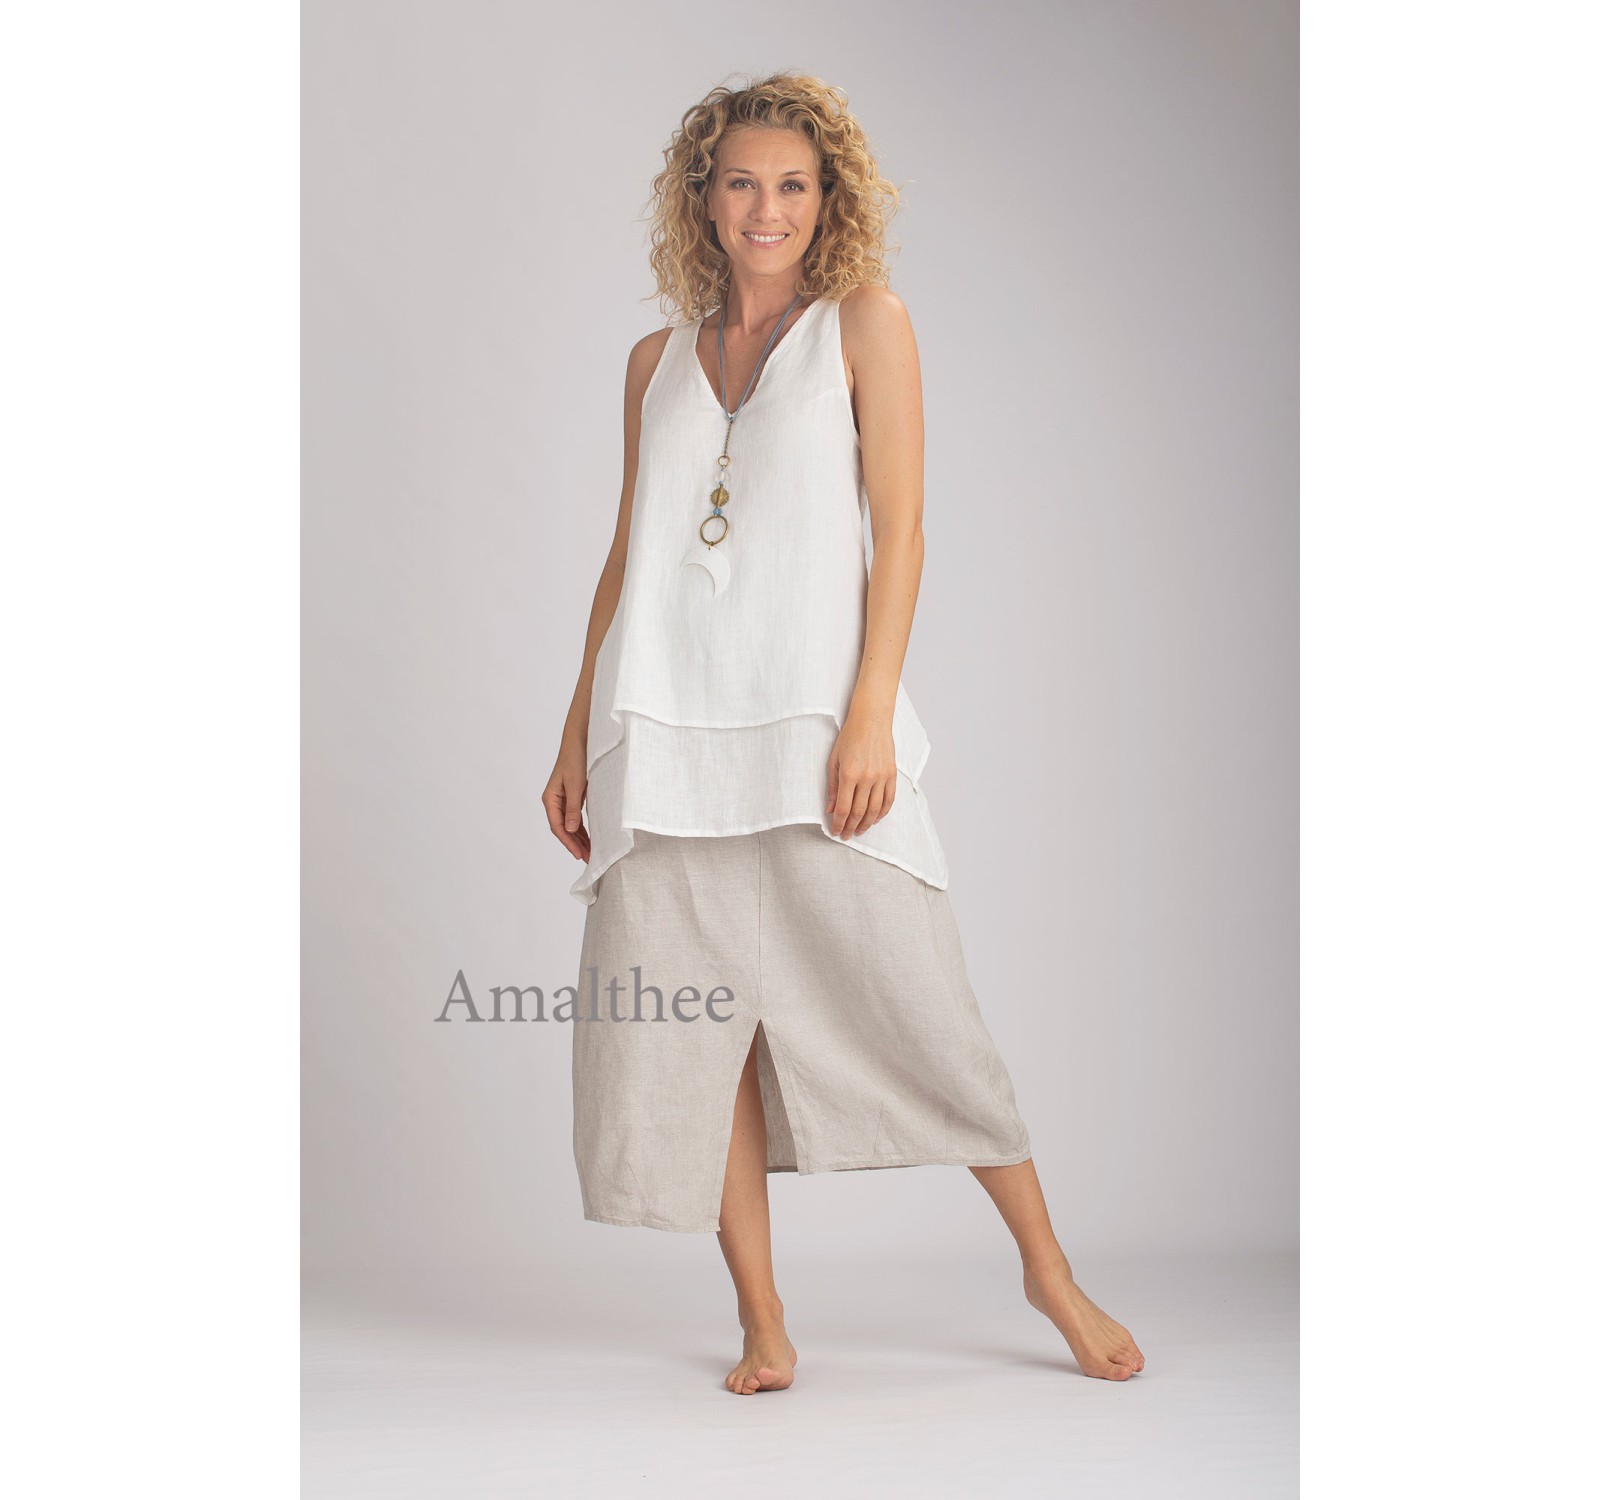 TRAPEZE TOP IN OFF-WHITE LINEN VEIL WITH OATMEAL ASSIA SKIRT